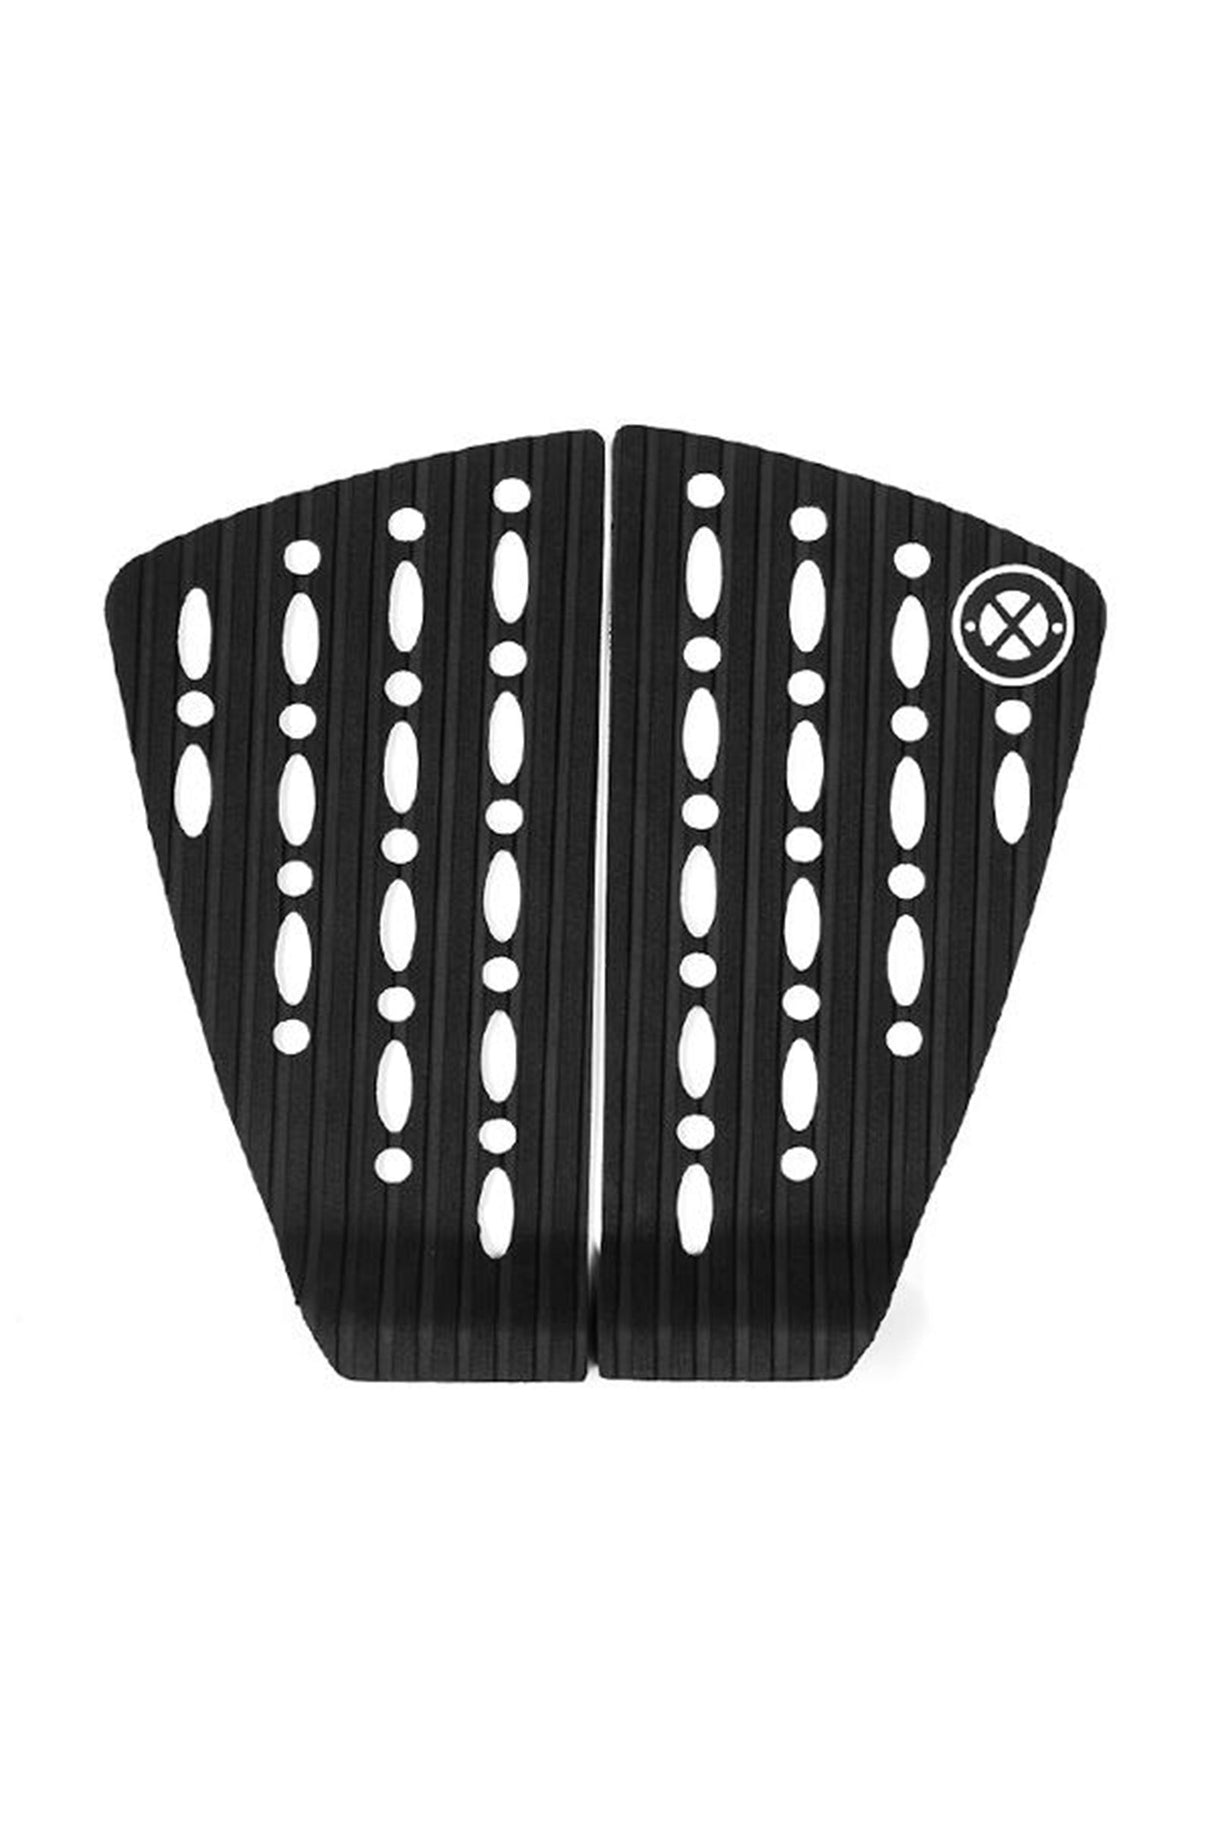 Dreded 2PC Macro Surfing Tail Pad - Black